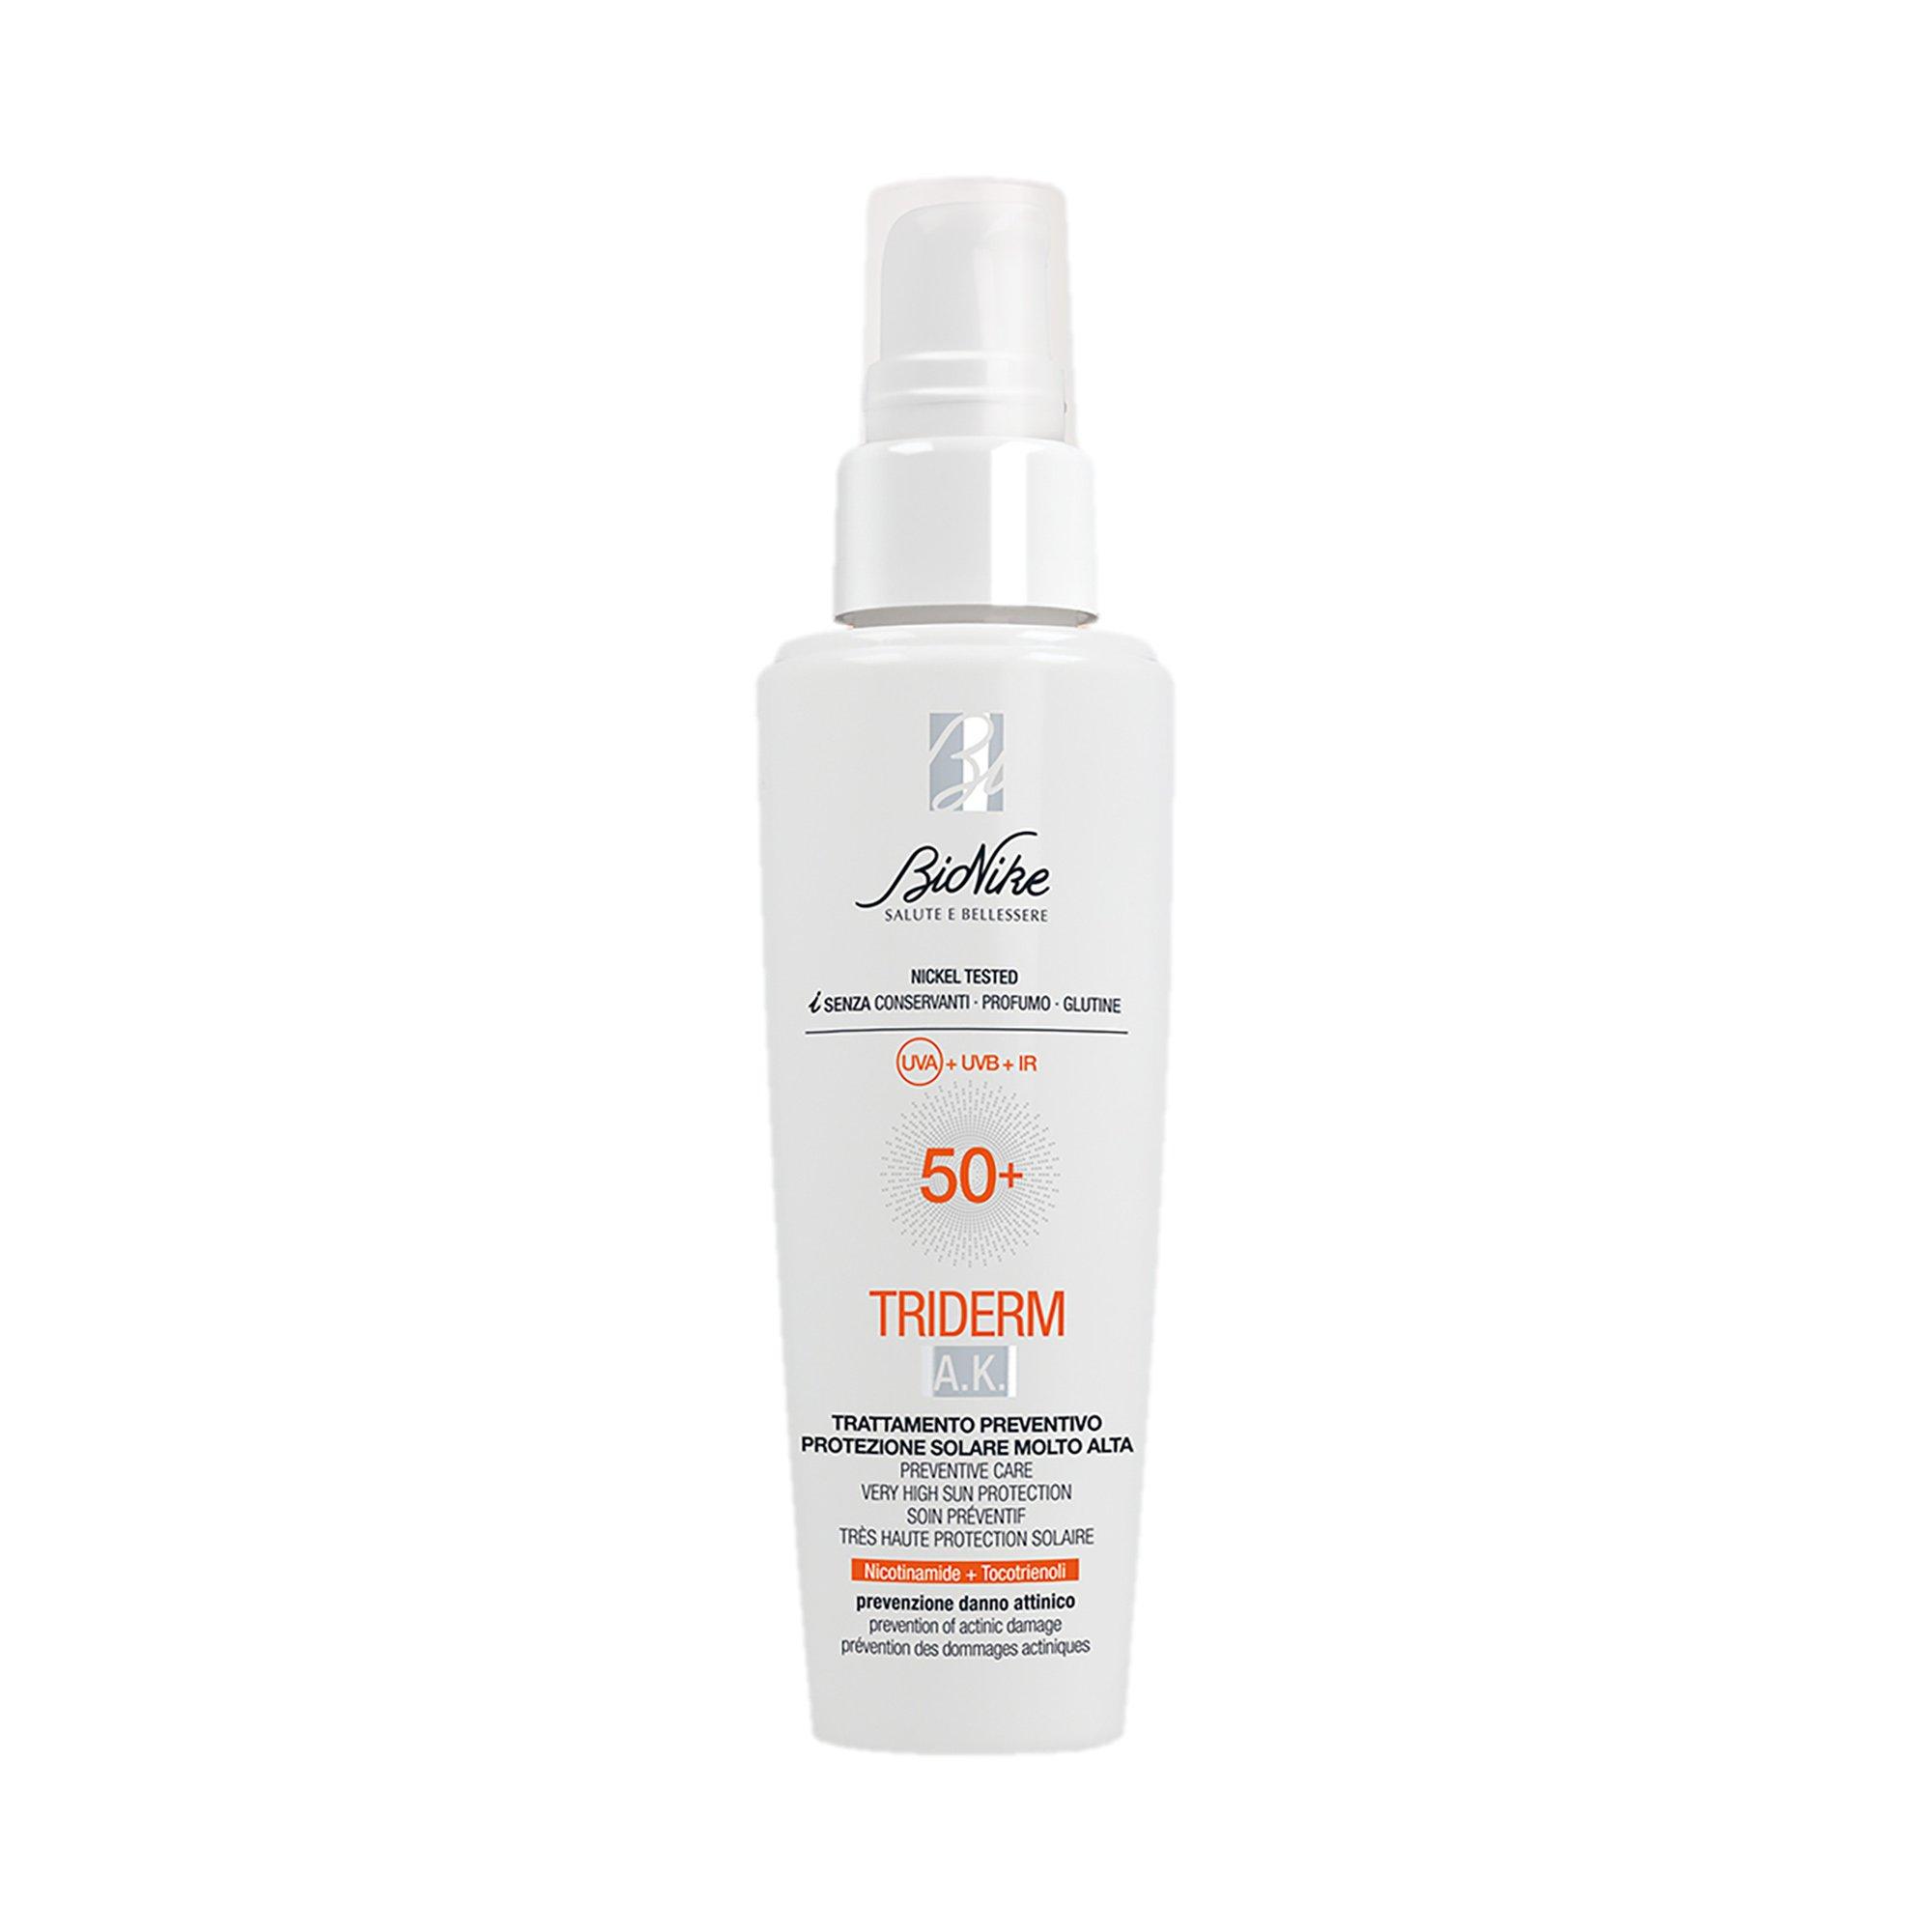 Image of BioNike Triderm A.K. 50+ - Actinic Damage Prevention Sonnencreme - 50ml